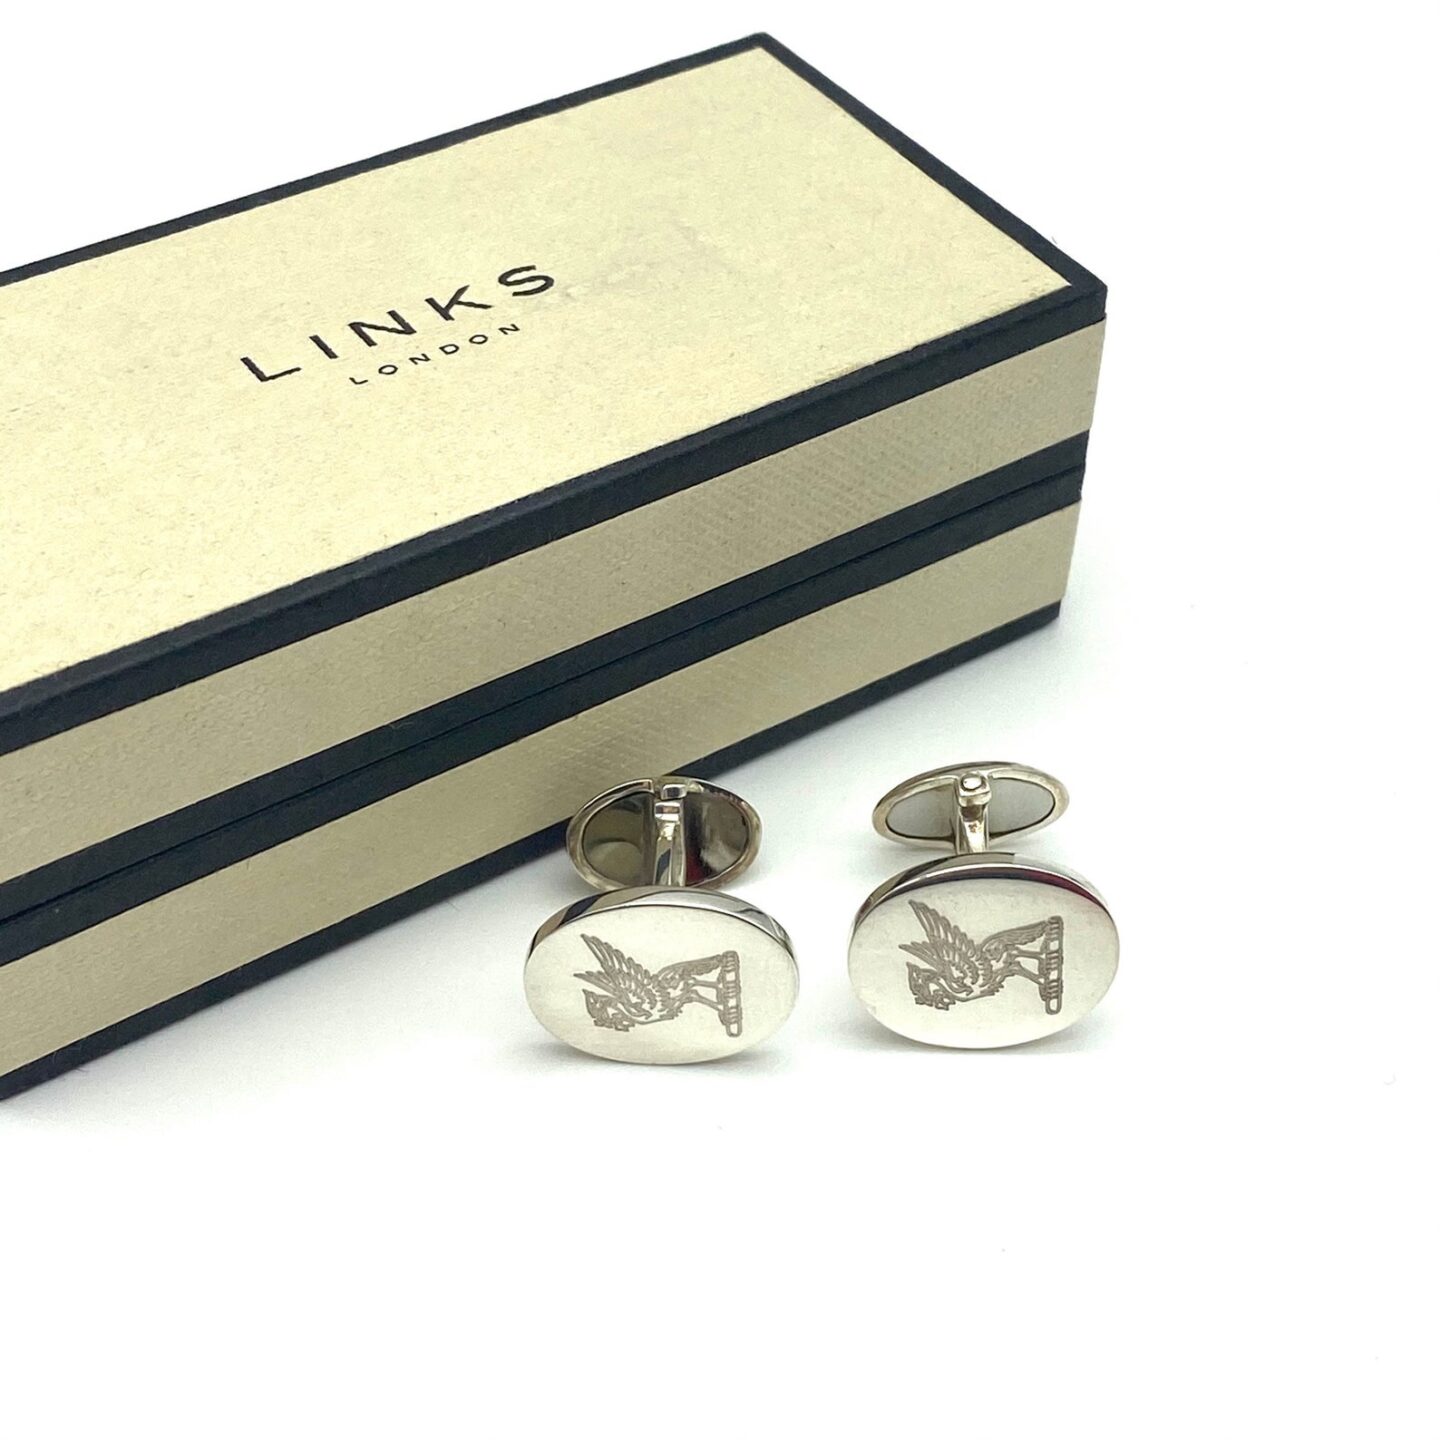 A Links of London box behind 2 silver round cufflinks with an engraved Liver Bird